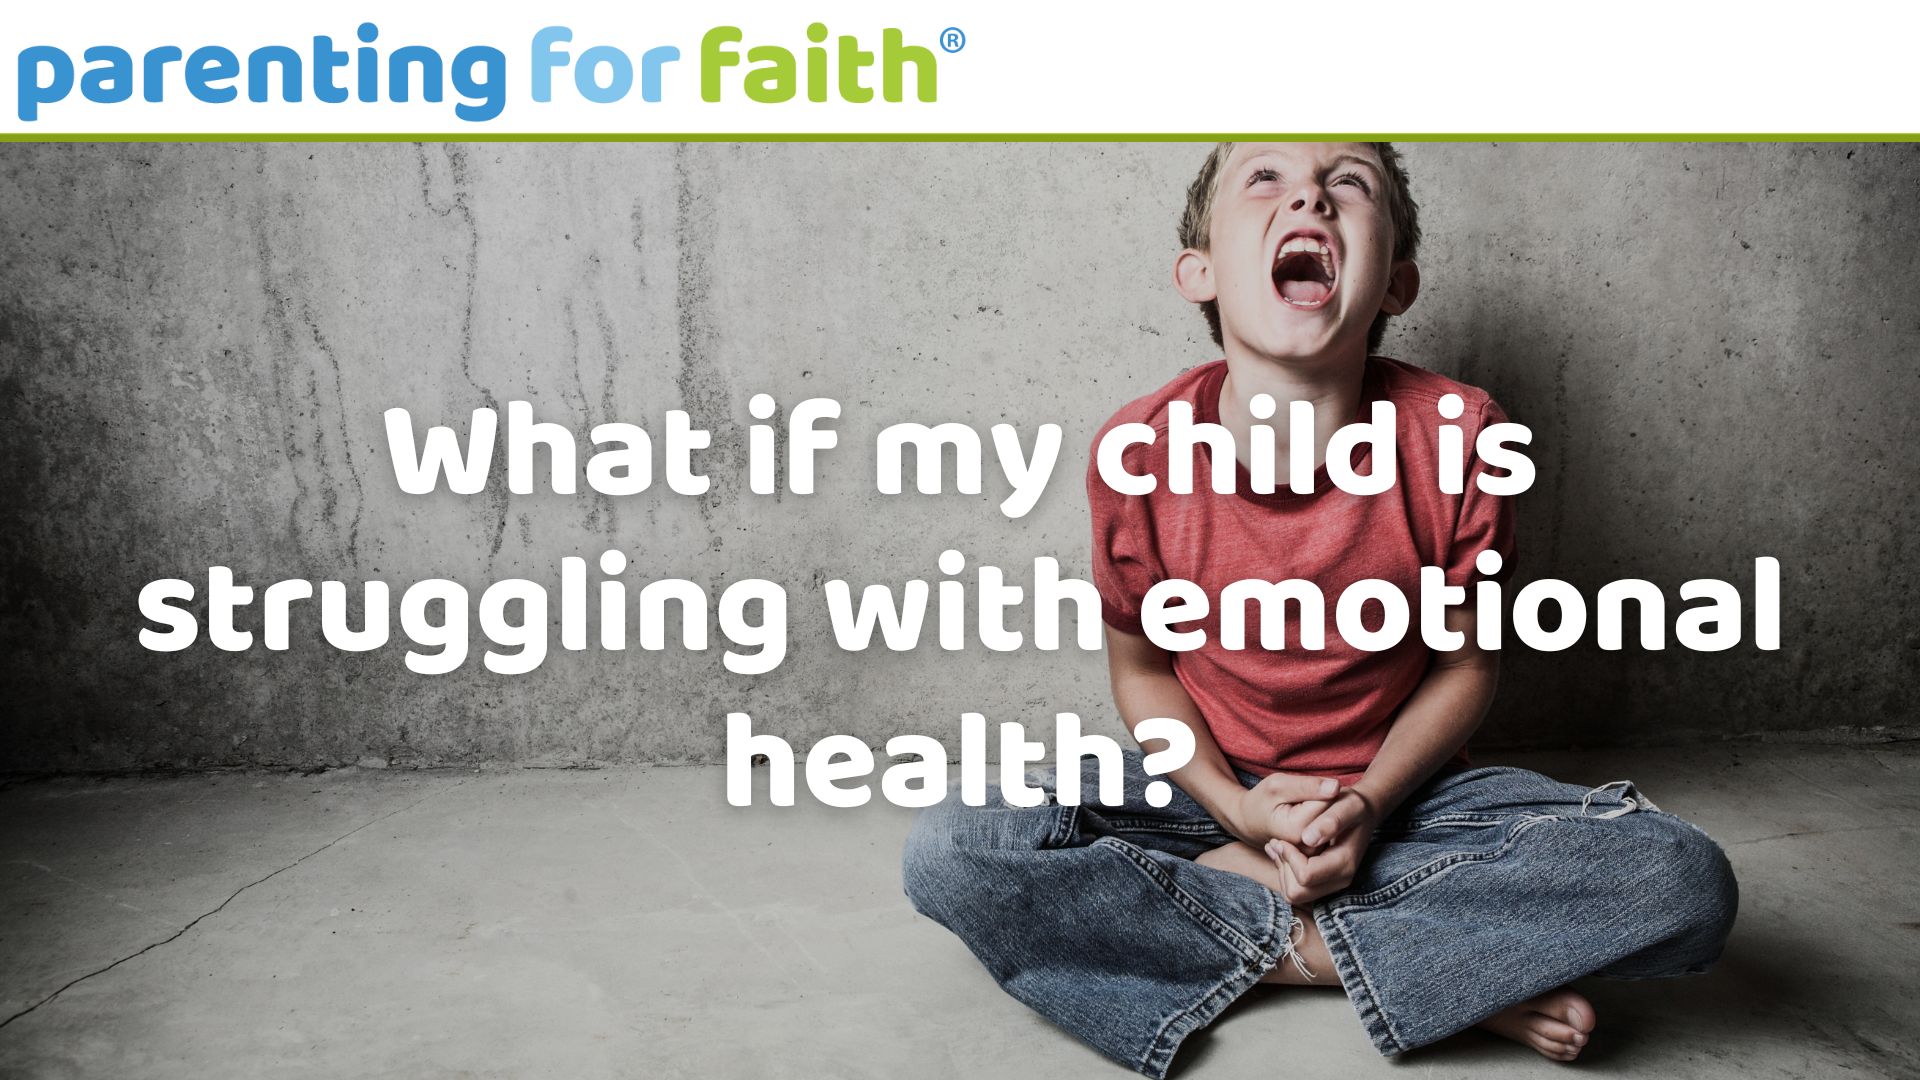 what if my child is struggling with emotional health image credit soupstock